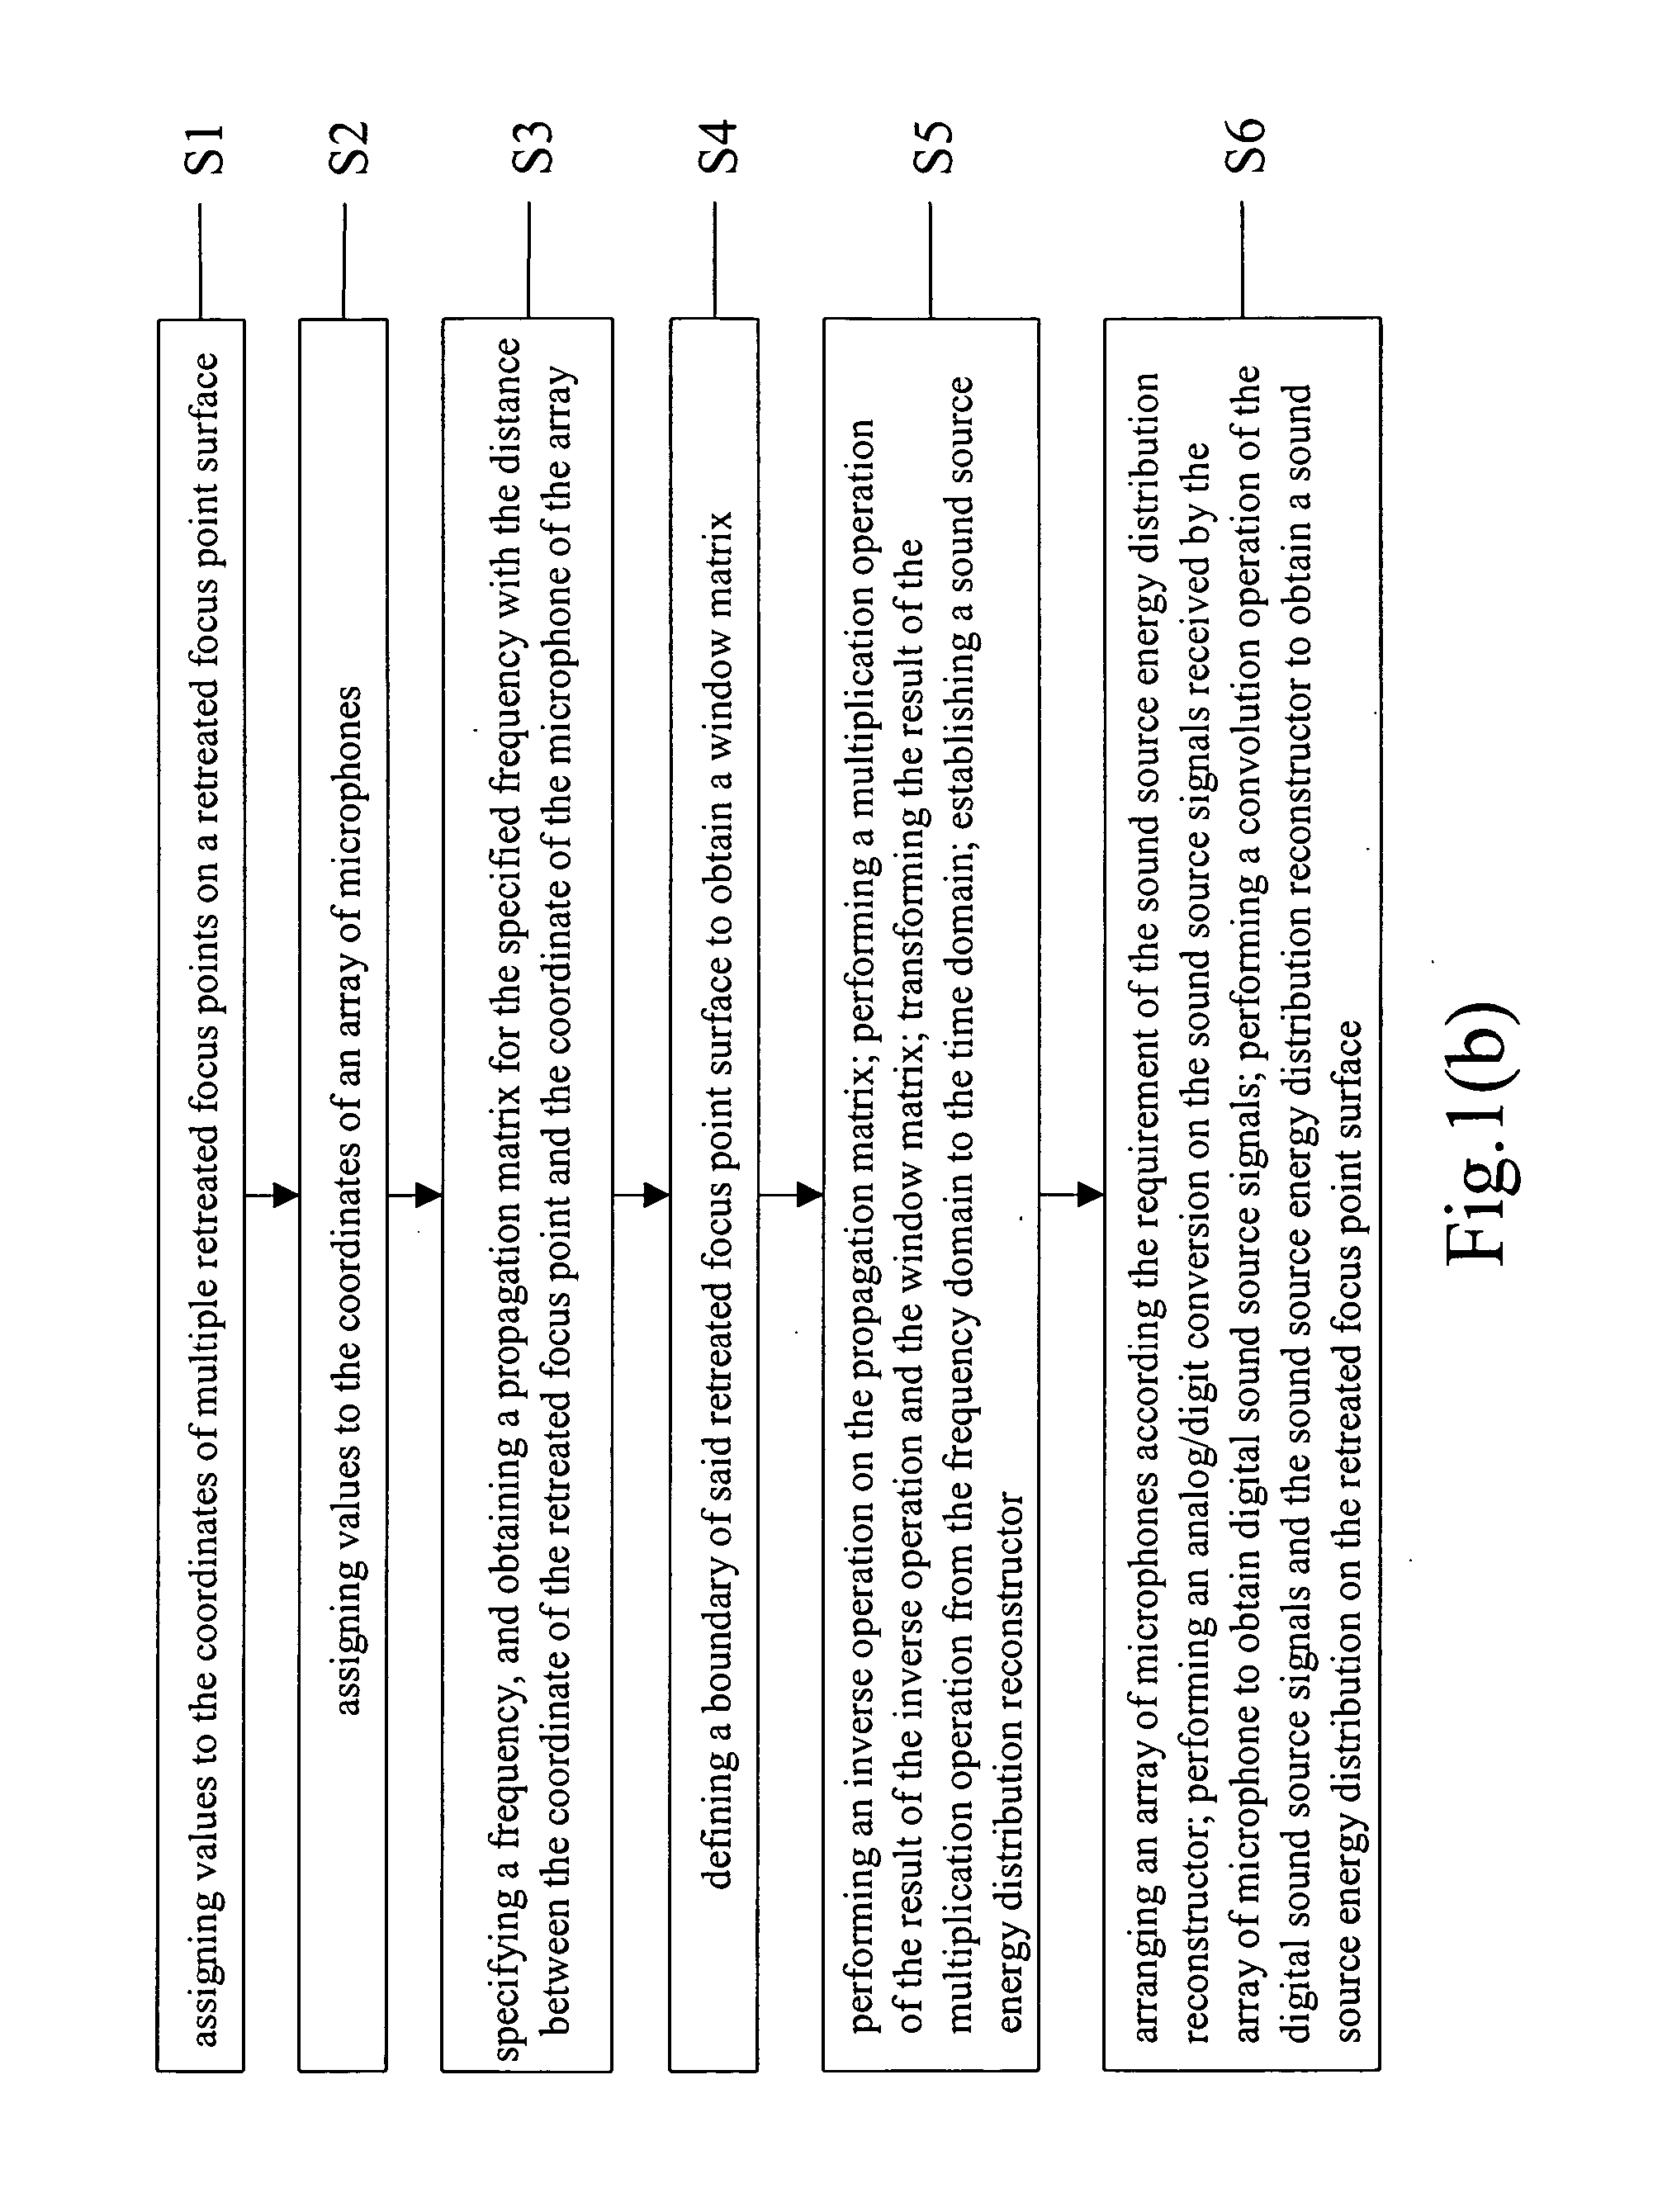 System and method for visualizing sound source energy distribution